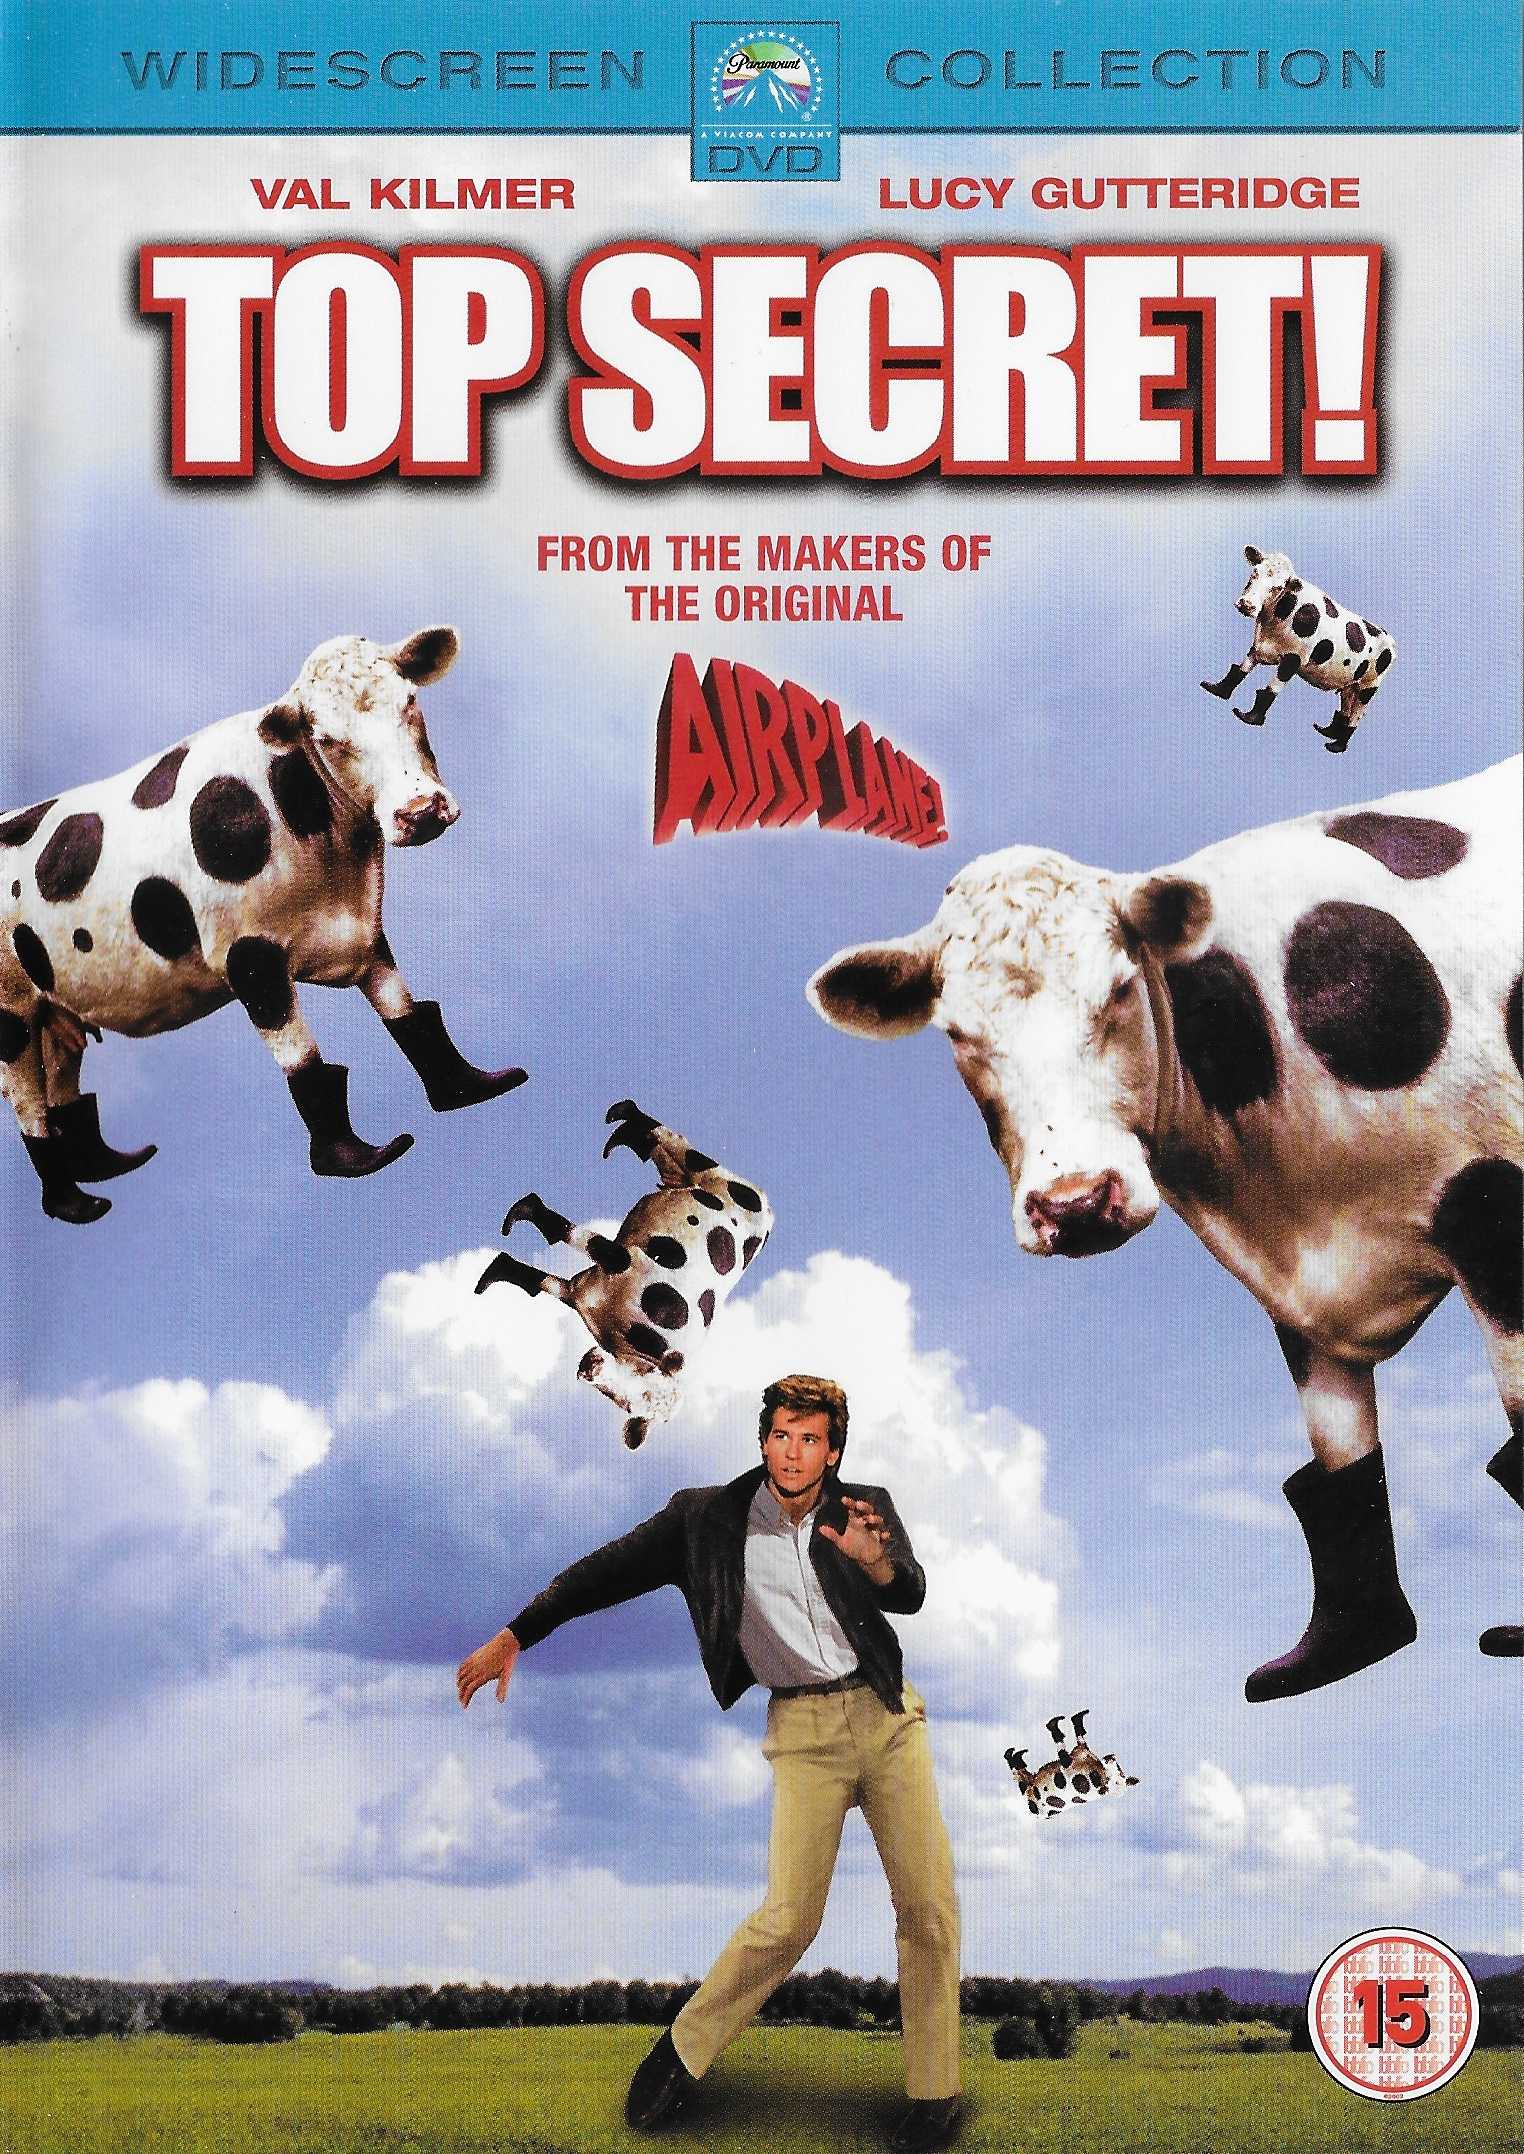 Picture of Top secret! by artist Jim Abrahams / David Zucker / Jerry Zucker / Marty Burke from ITV, Channel 4 and Channel 5 dvds library